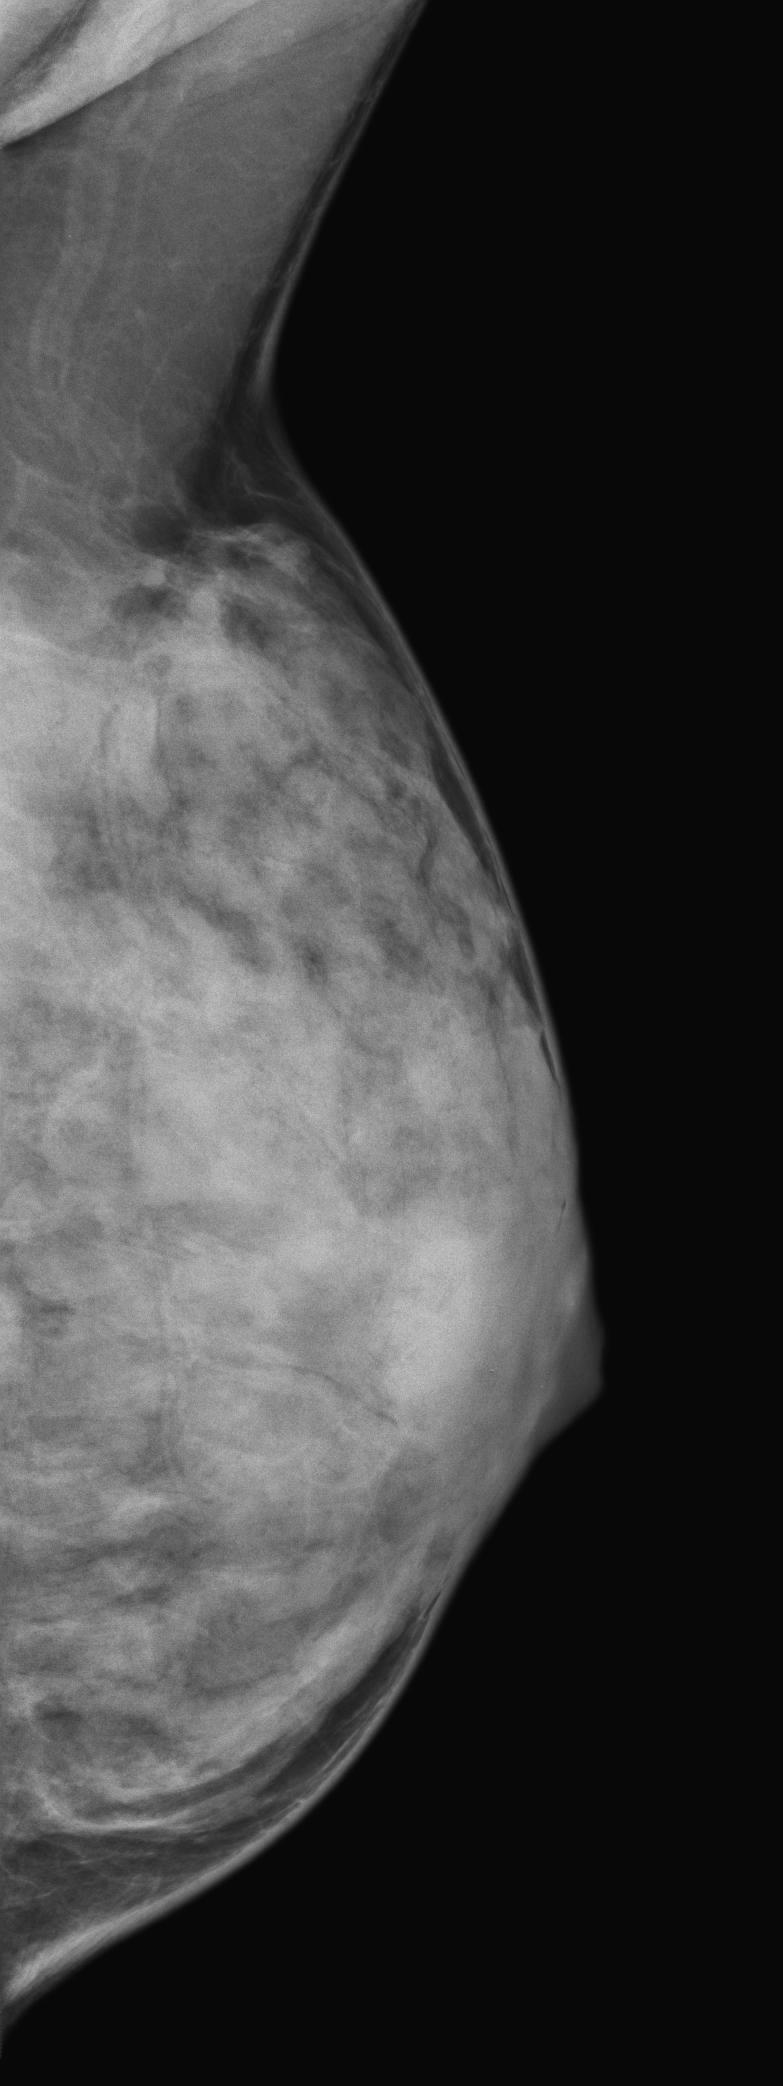 No Indication for Breast MRI: Screening low-risk patients